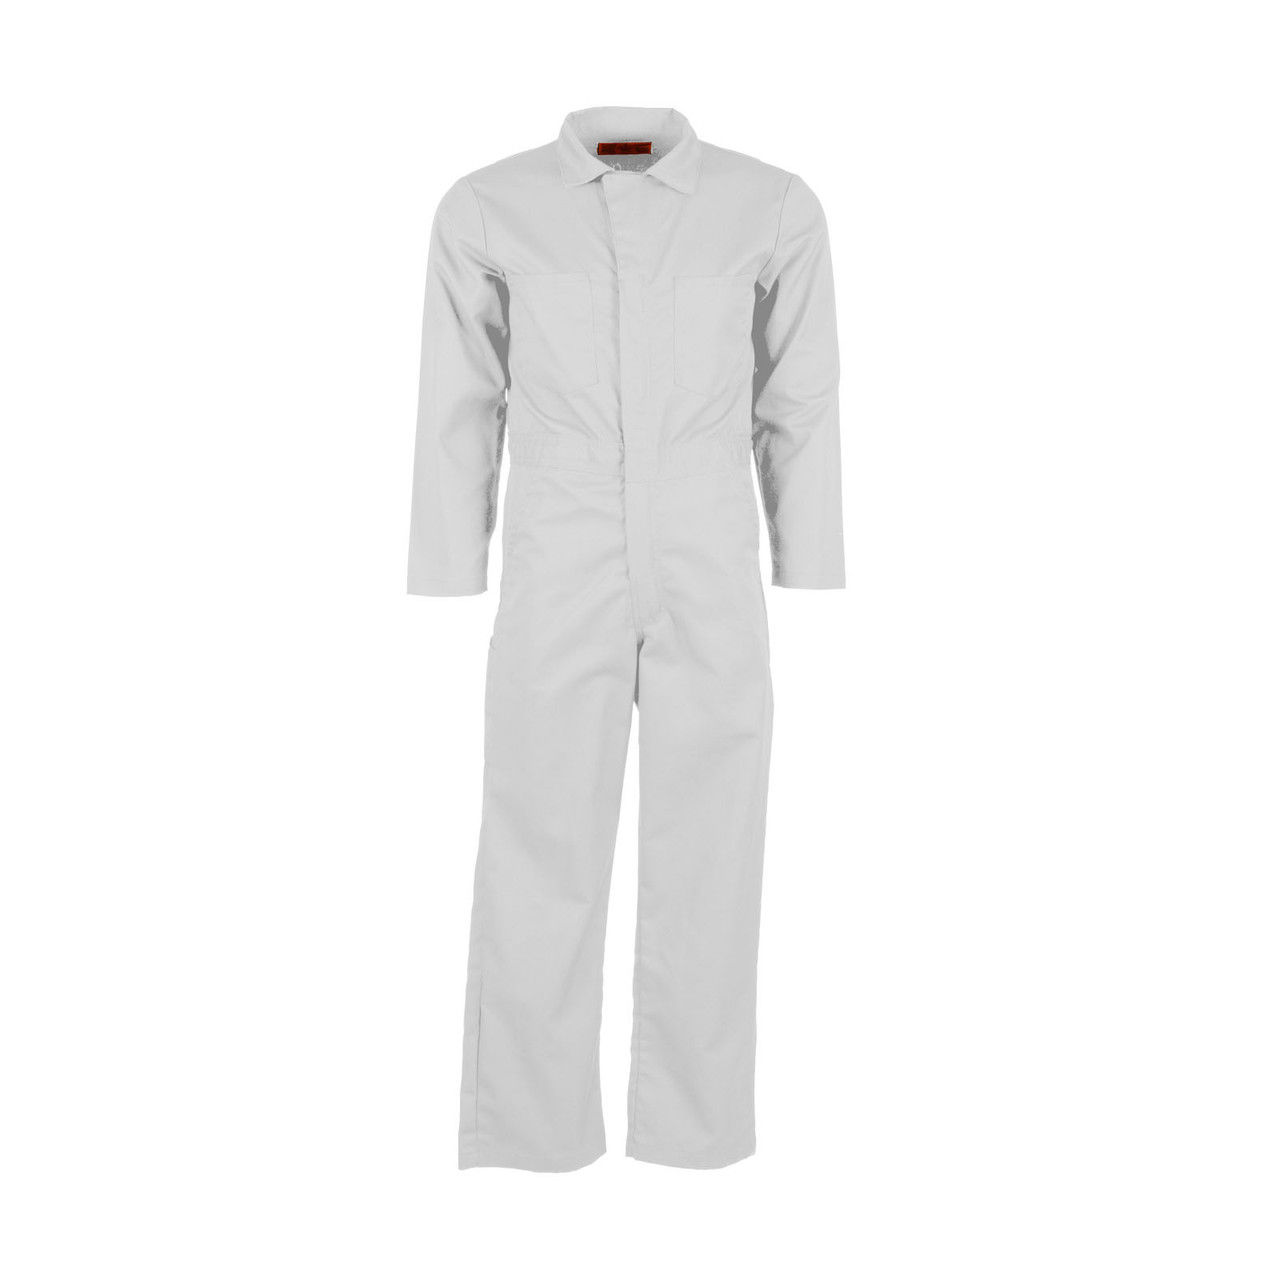 What is the weight of the fabric used in the white coveralls?